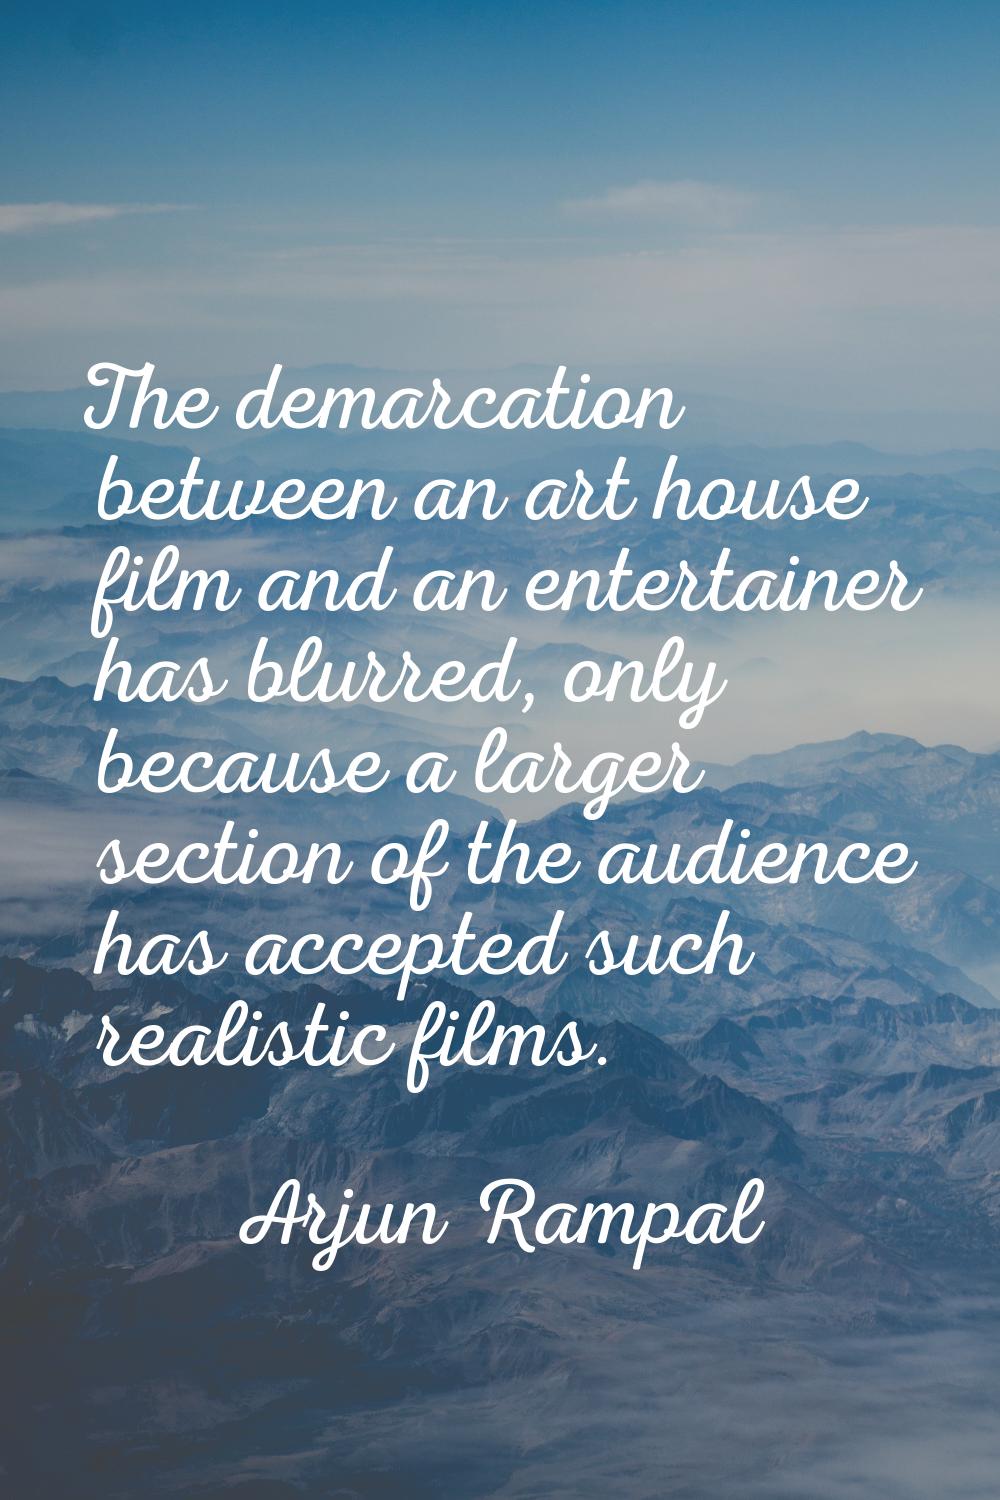 The demarcation between an art house film and an entertainer has blurred, only because a larger sec